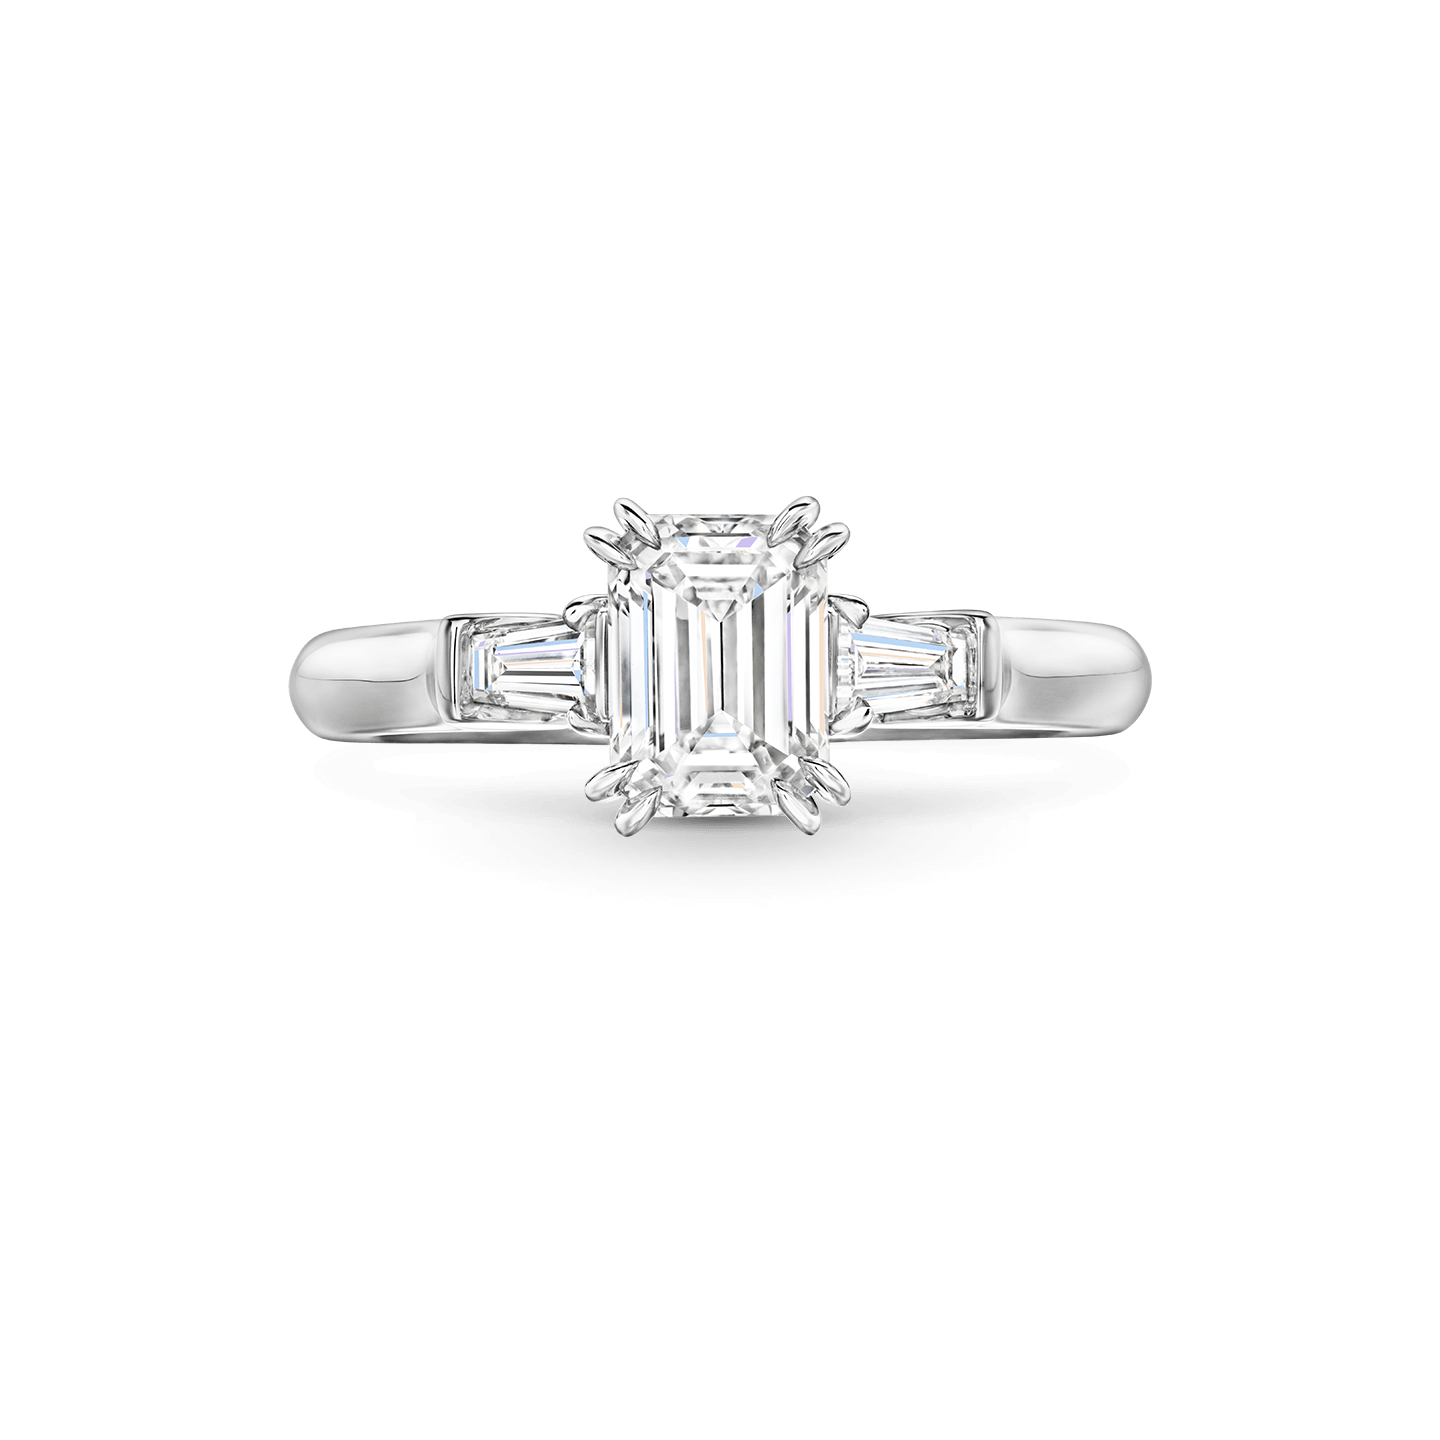 Front view of the Classic Winston Emerald-Cut Engagement Ring with Tapered Baguette Side Stones